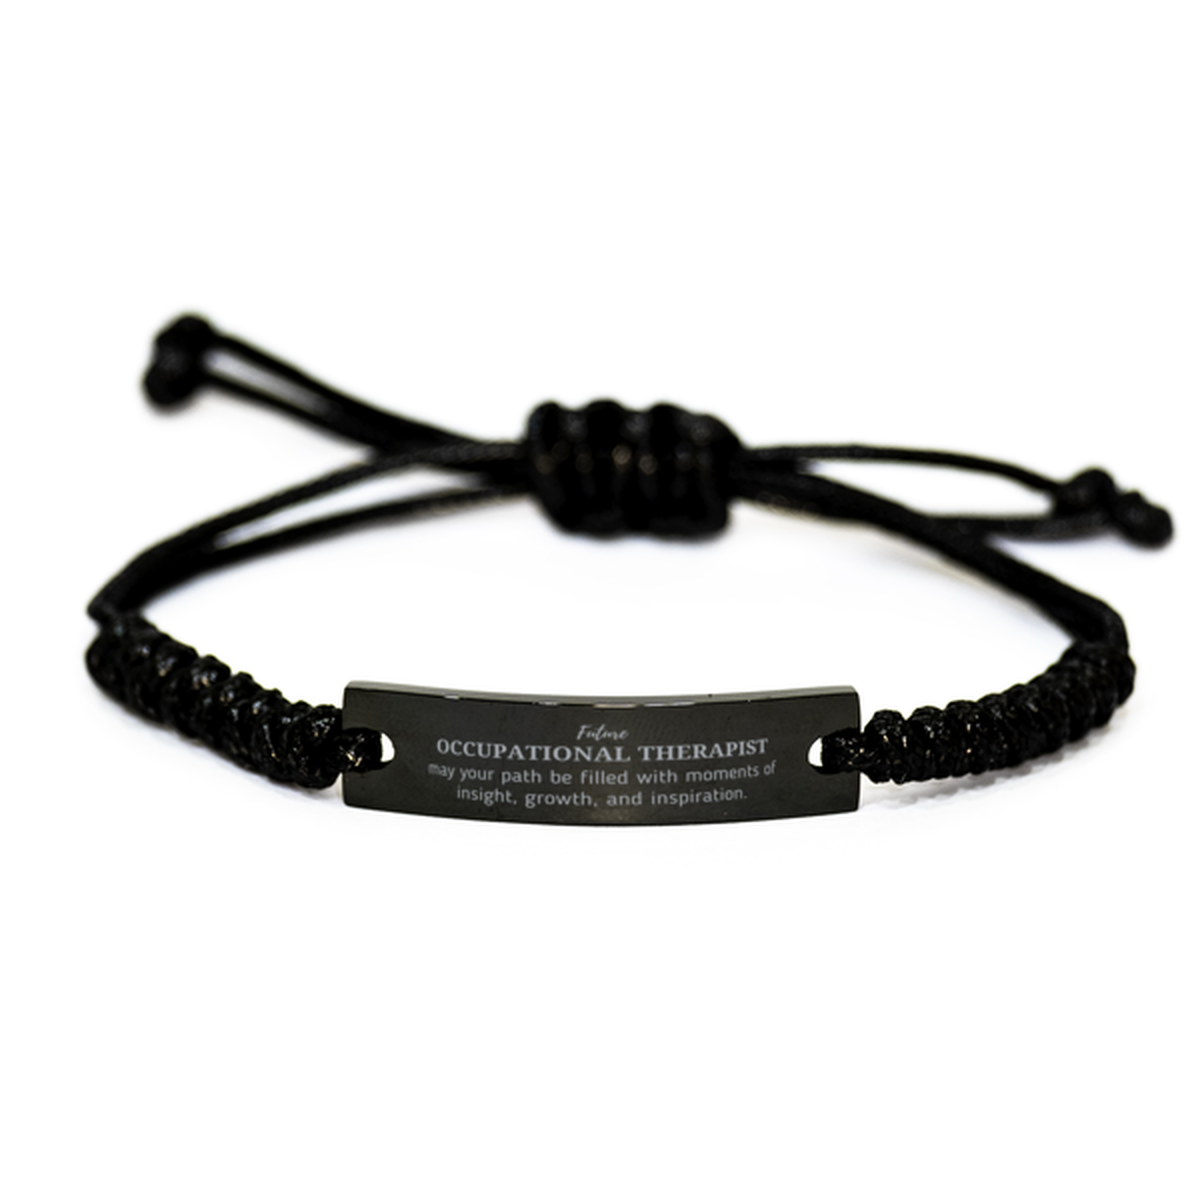 Future Occupational Therapist Gifts, May your path be filled with moments of insight, Graduation Gifts for New Occupational Therapist, Christmas Unique Black Rope Bracelet For Men, Women, Friends